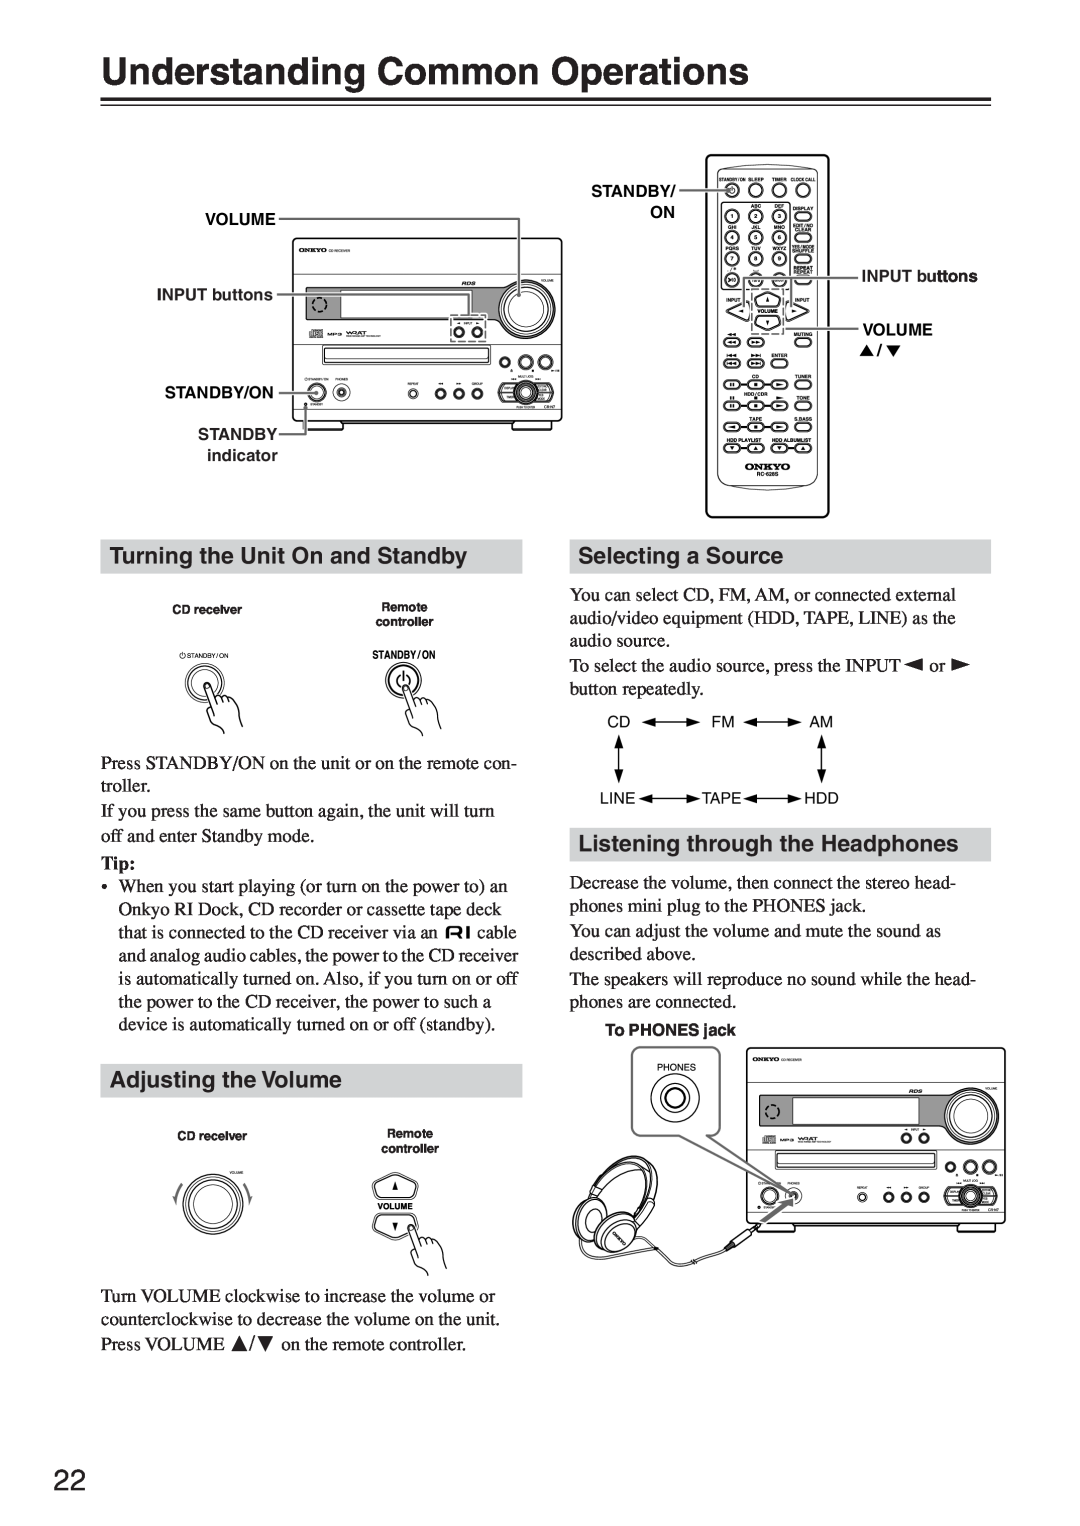 Onkyo CR-N7 Understanding Common Operations, Turning the Unit On and Standby, Selecting a Source, Adjusting the Volume 